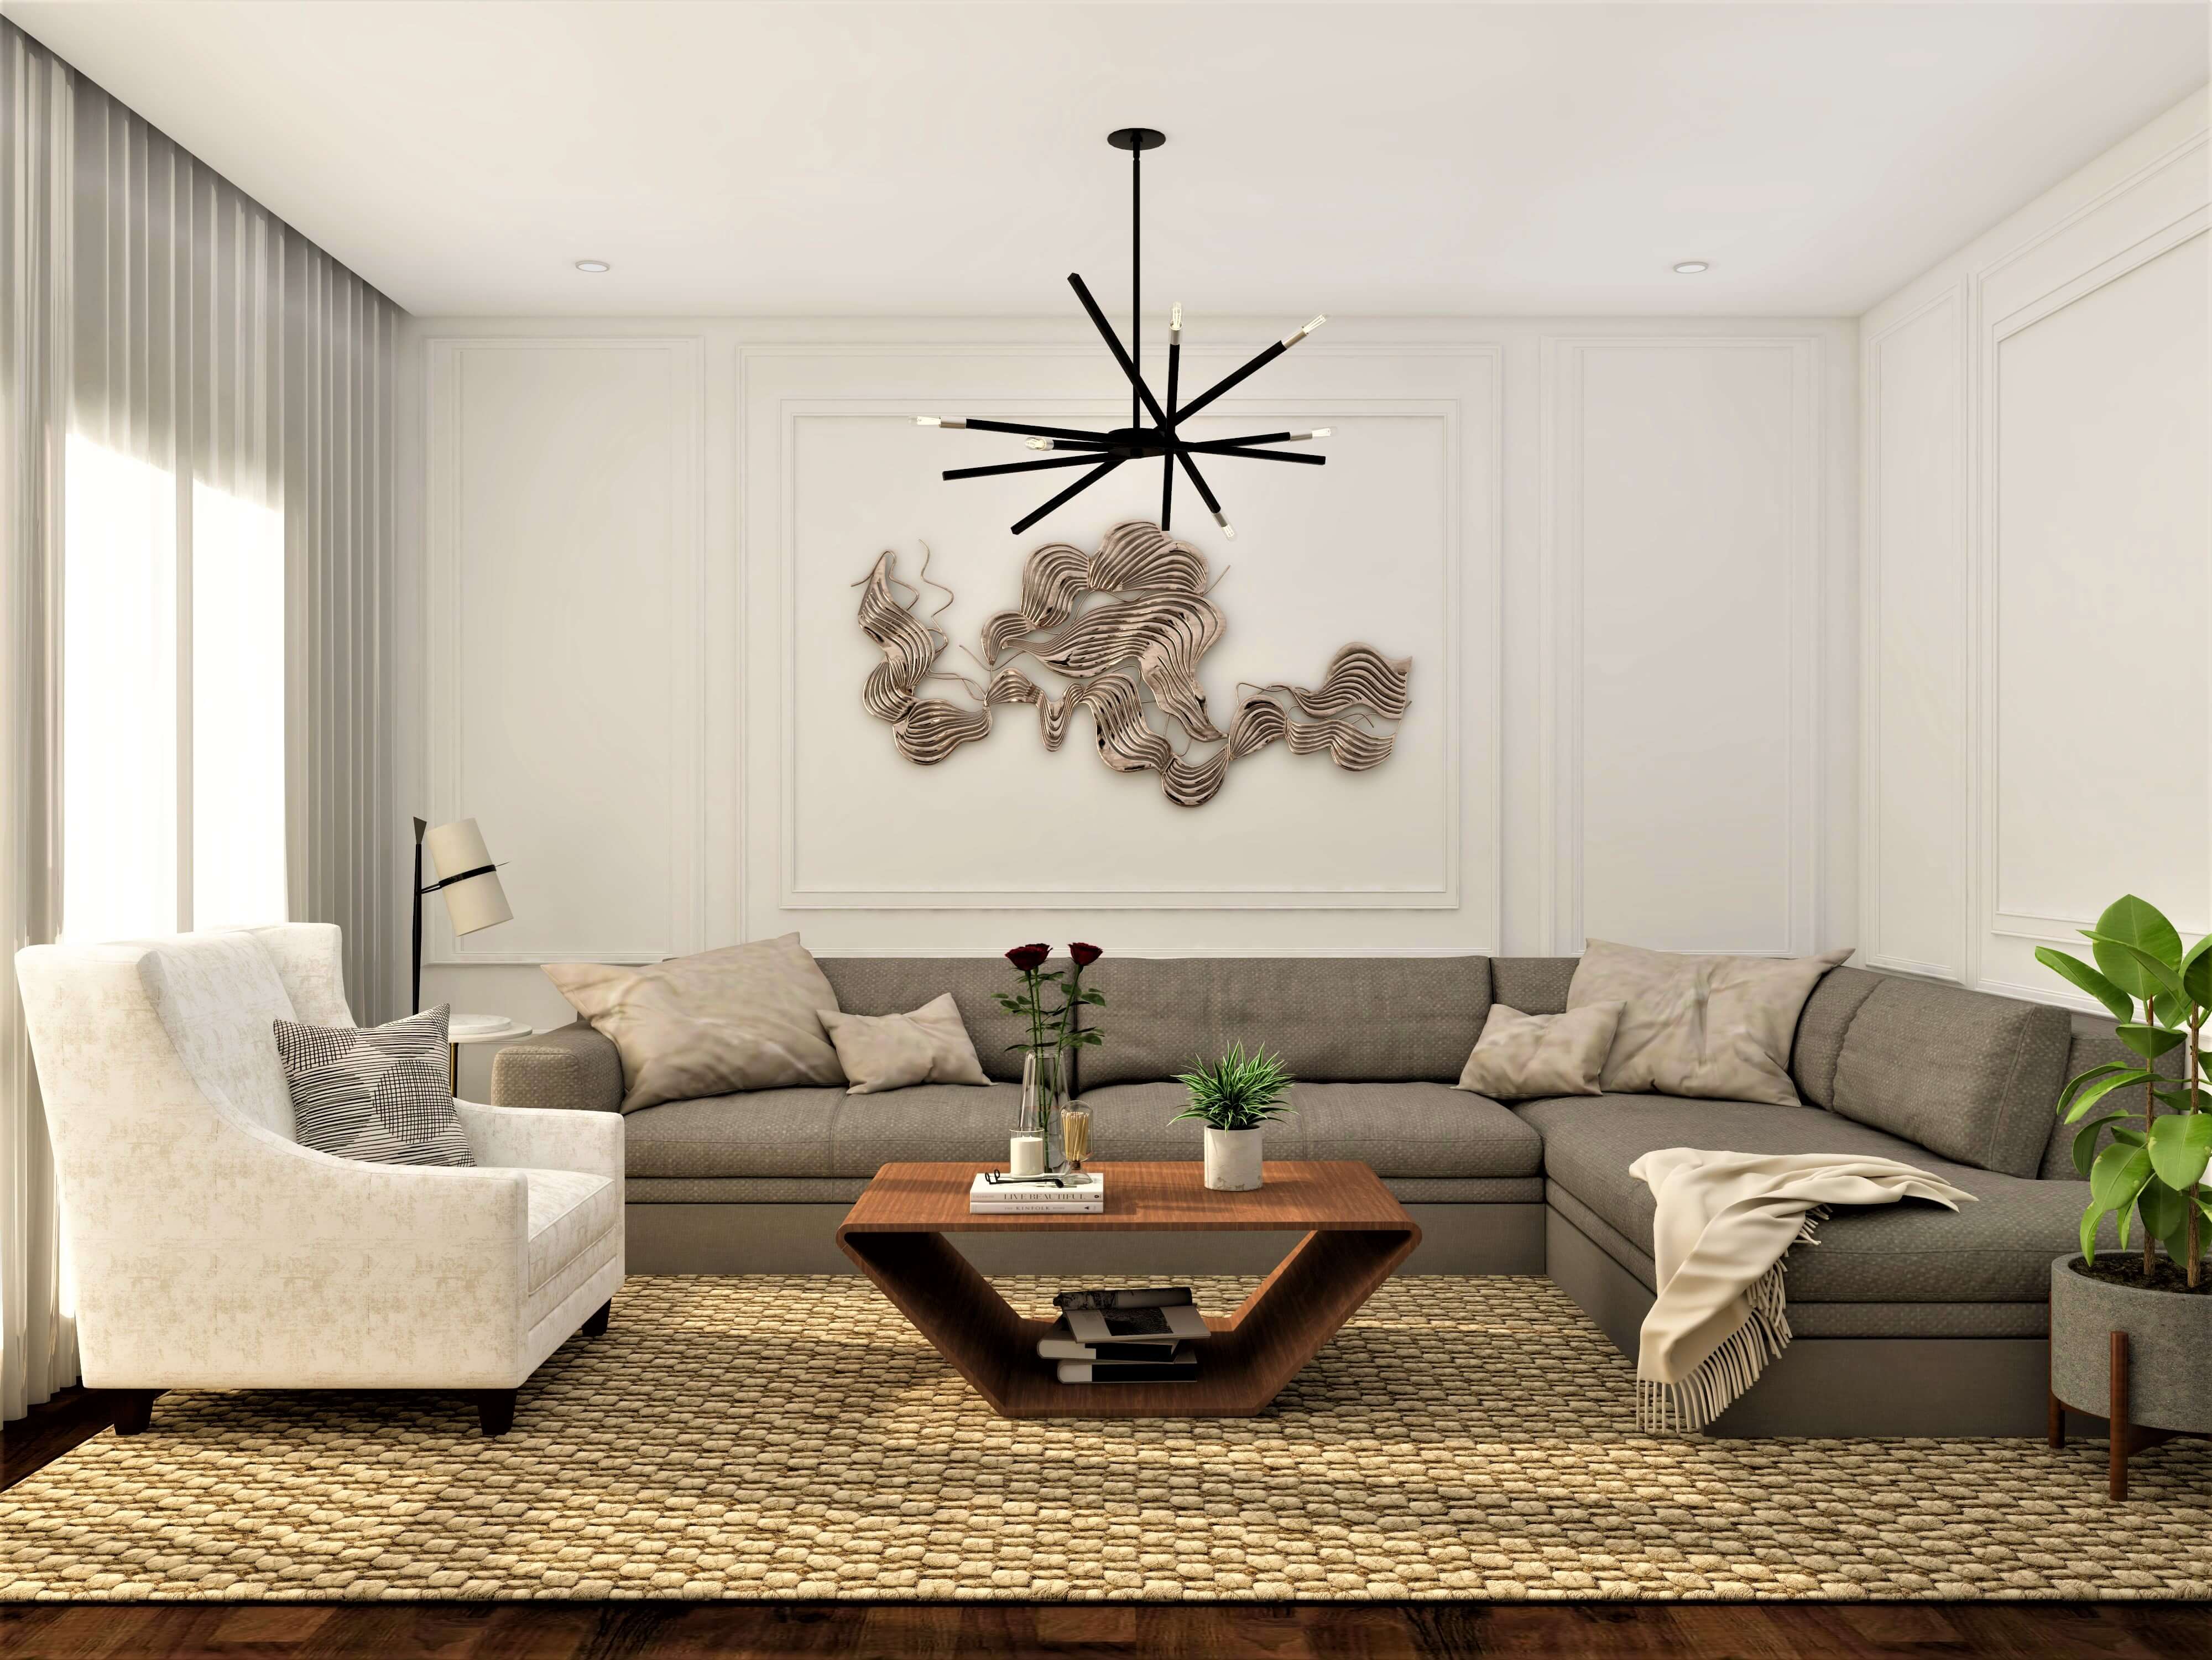 Contemporary living room design with white interiors - Beautiful Homes